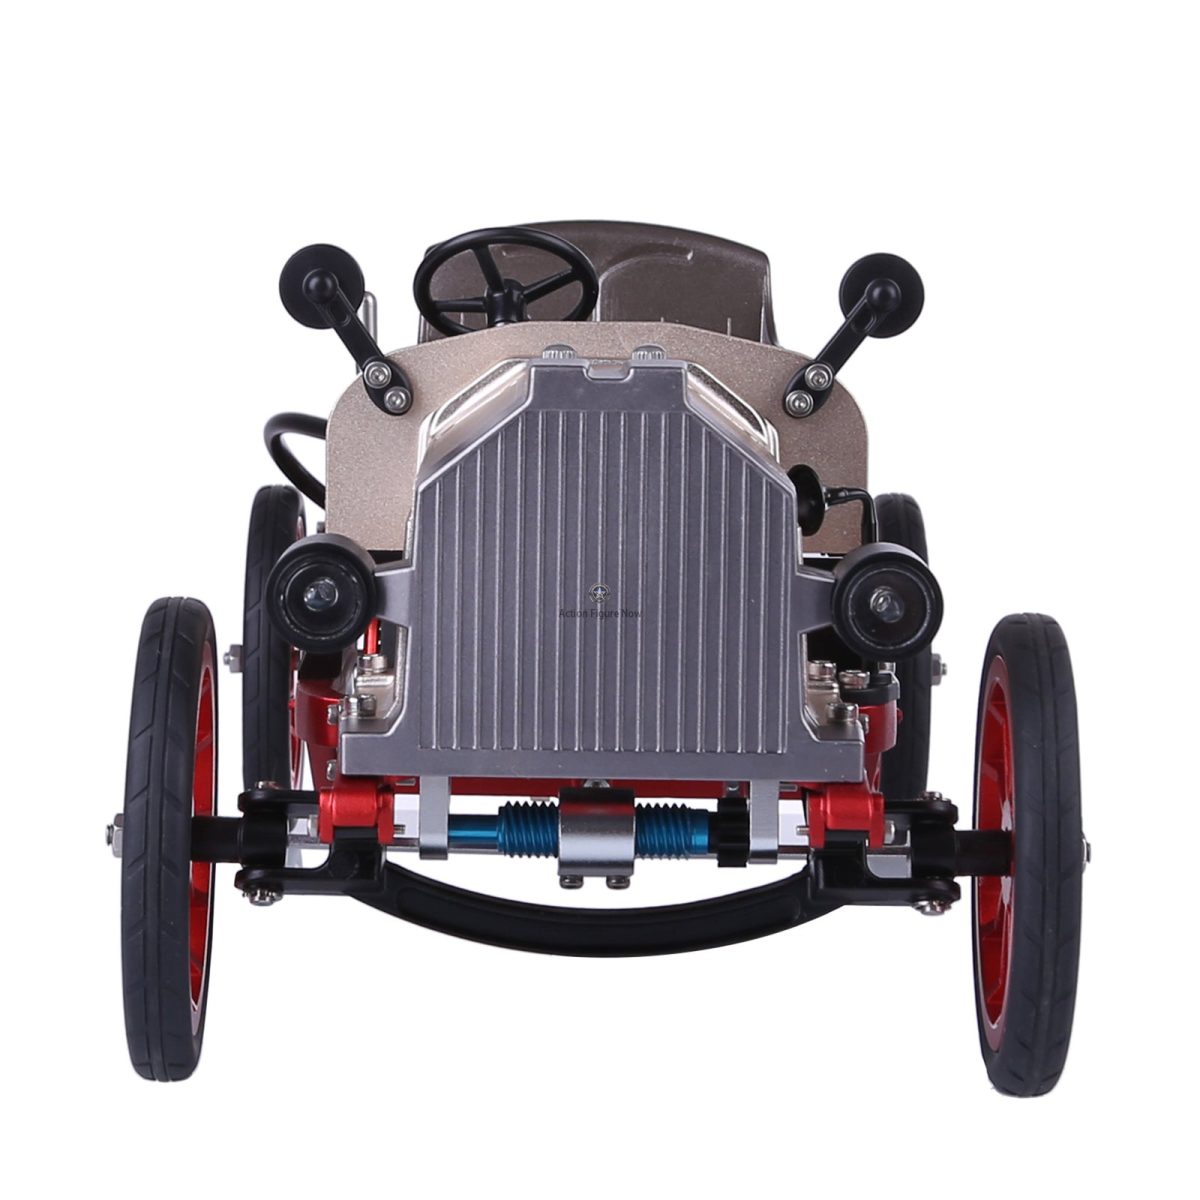 Teching Electric Single-Cylinder Motorcycle Engine DIY Kit, Vintage Classic Car DIY Metal Mechanical Model, High Level Educational Collection